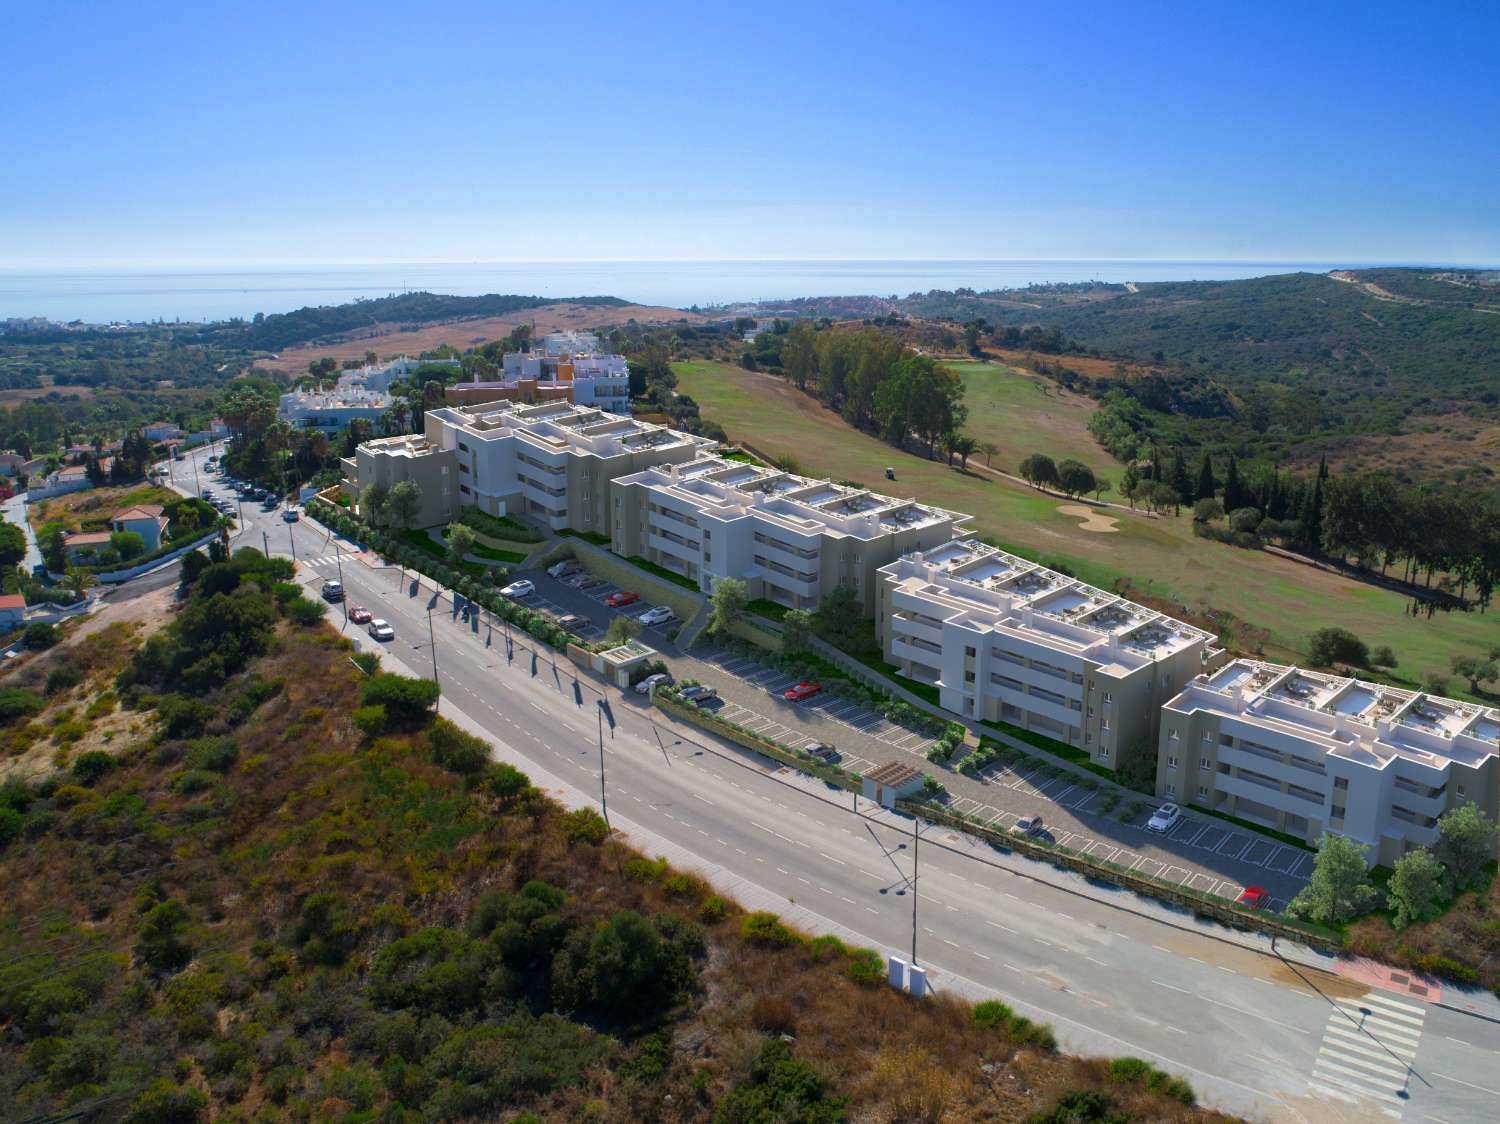 NEW BUILD APARTMENTS AND PENTHOUSES FOR SALE IN ESTEPONA, COSTA DEL SOL